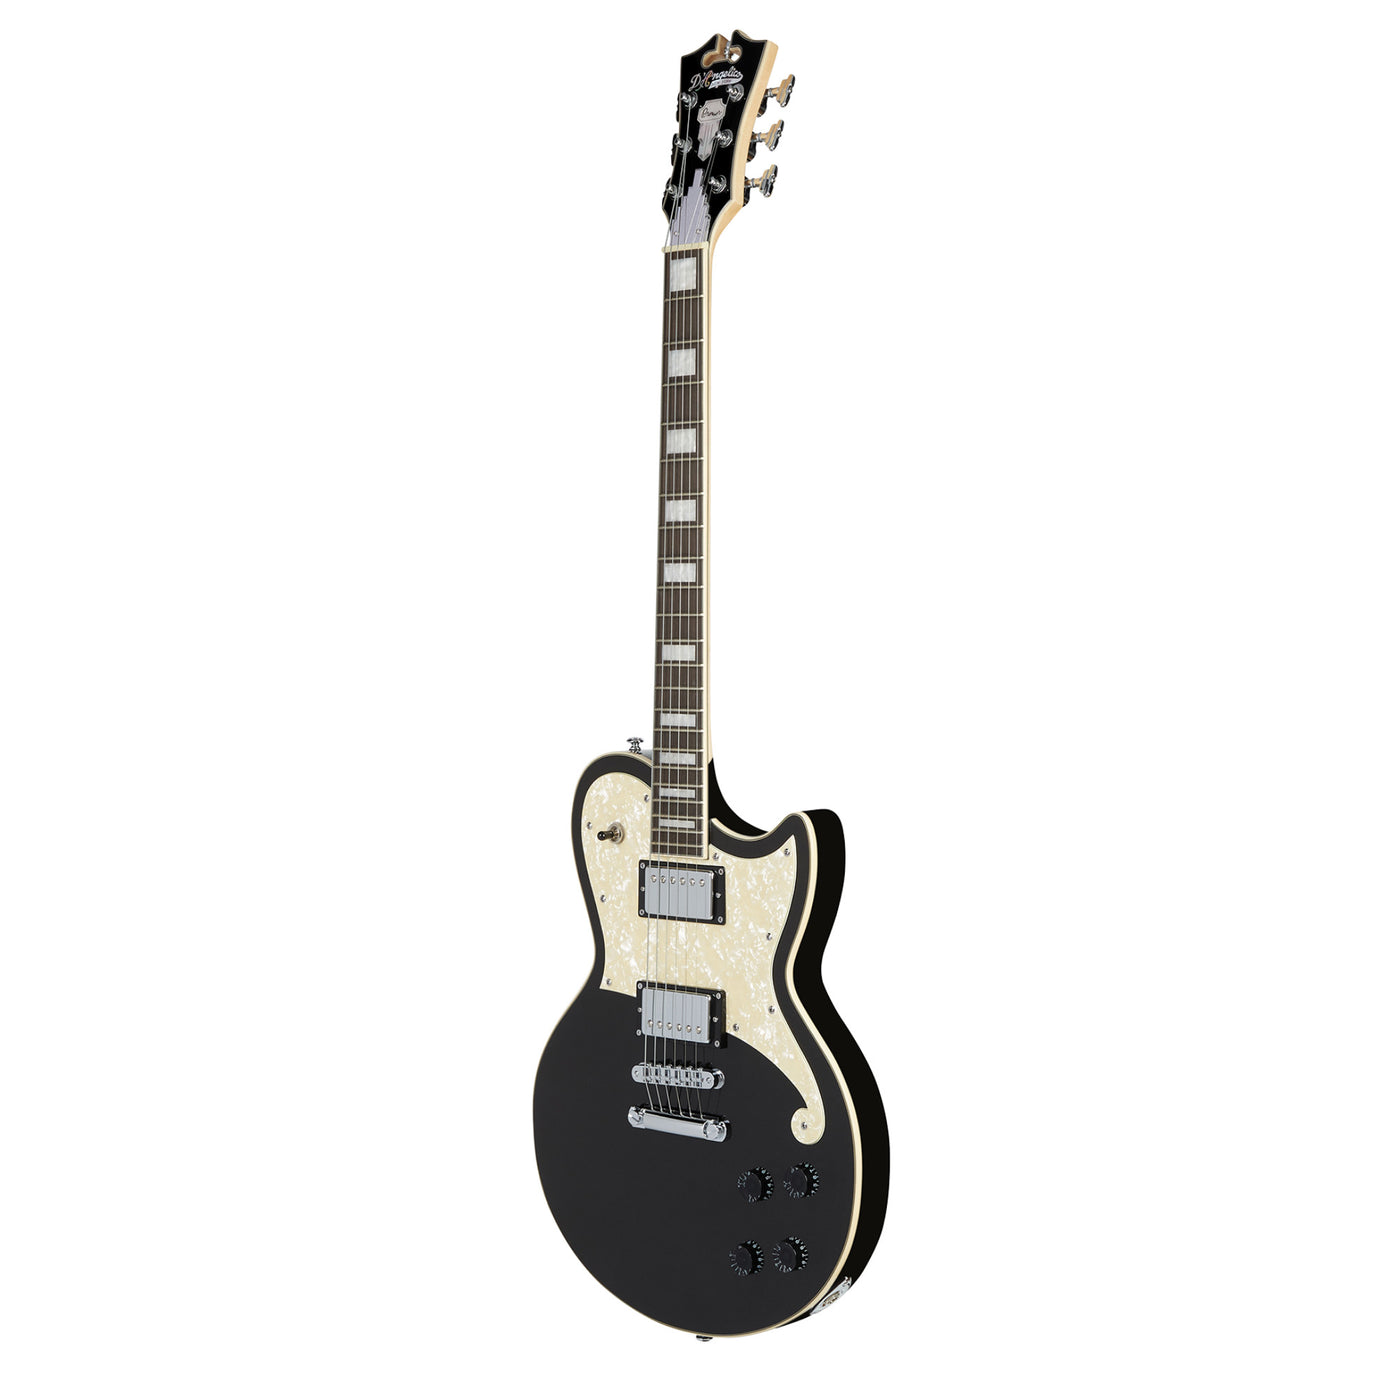 D’Angelico Premier Atlantic Electric Guitar with Stopbar Tailpiece, Black Flake (DAPATLBLFCS)